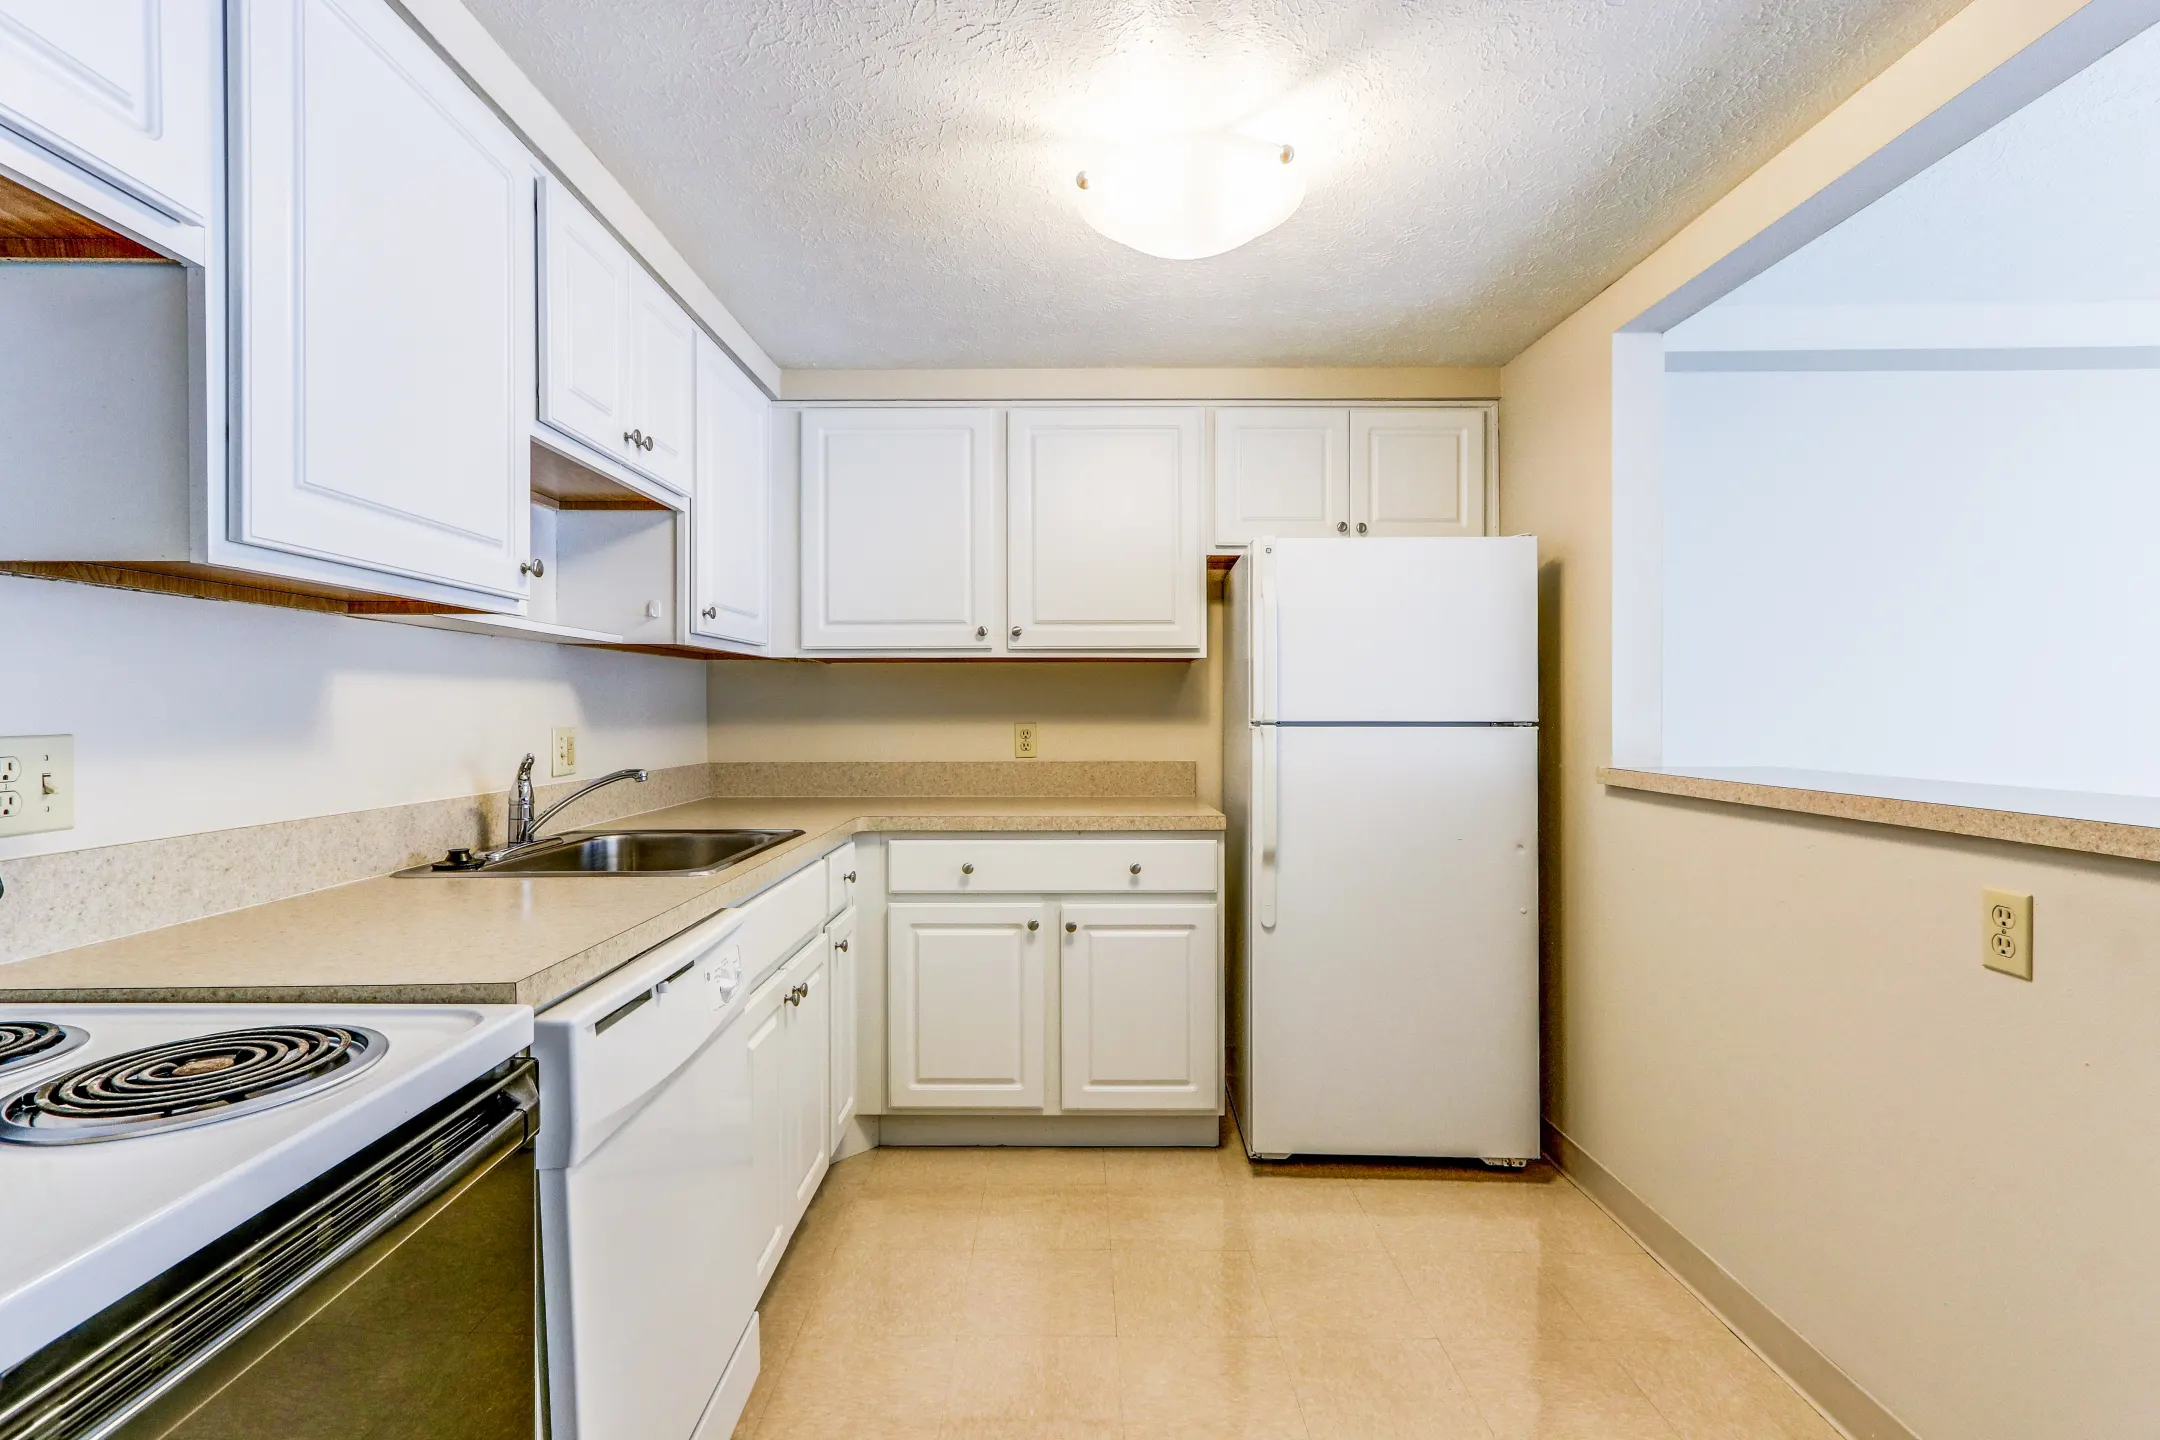 Kitchen - Concord Apartments - Cleveland Heights, OH